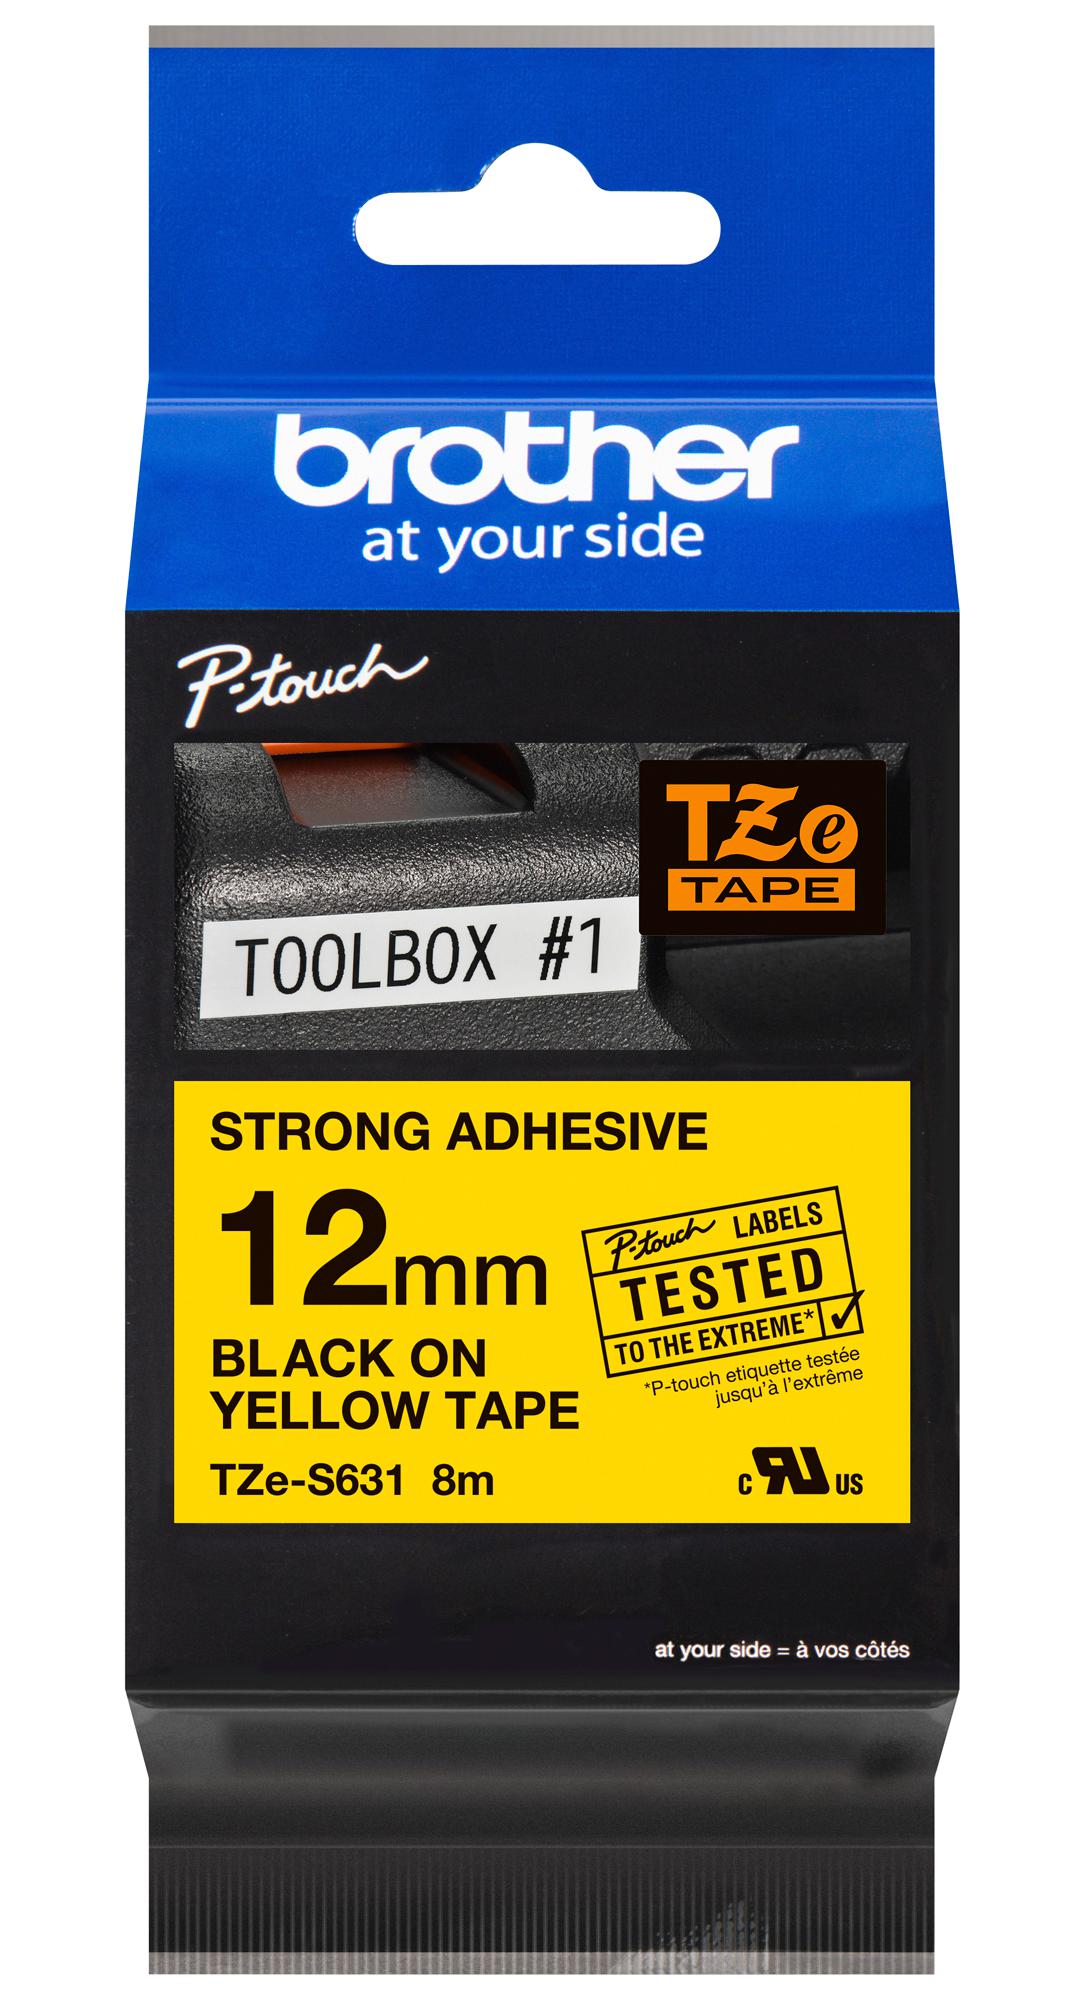 Brother Tze-S631 Tape, 12mm, Black/yellow, S/adh